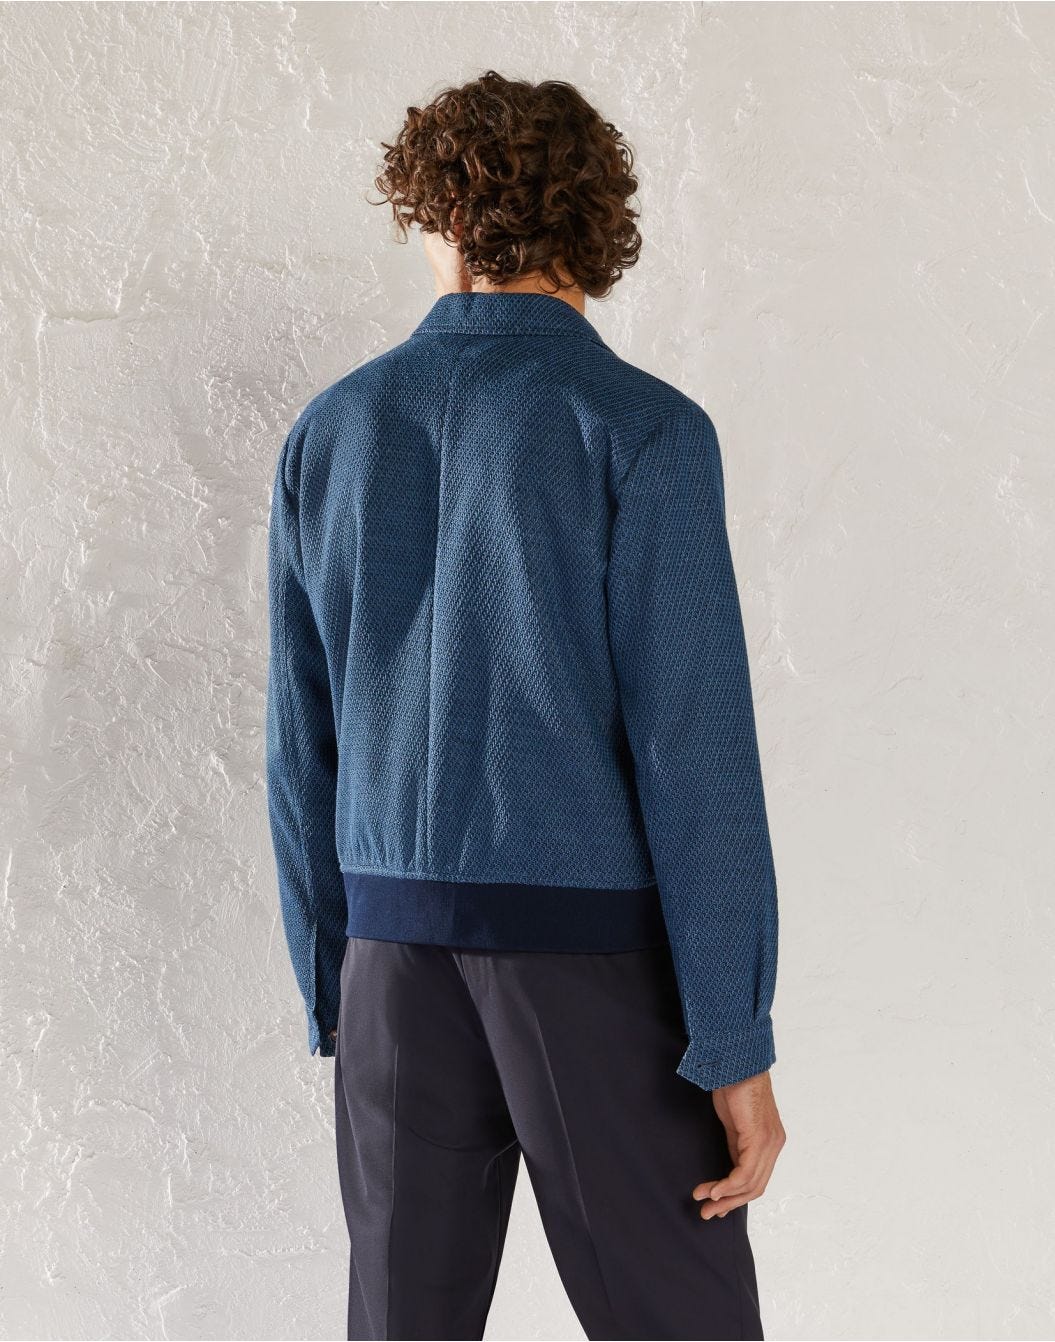 Linen and polyester jacket - Liknit